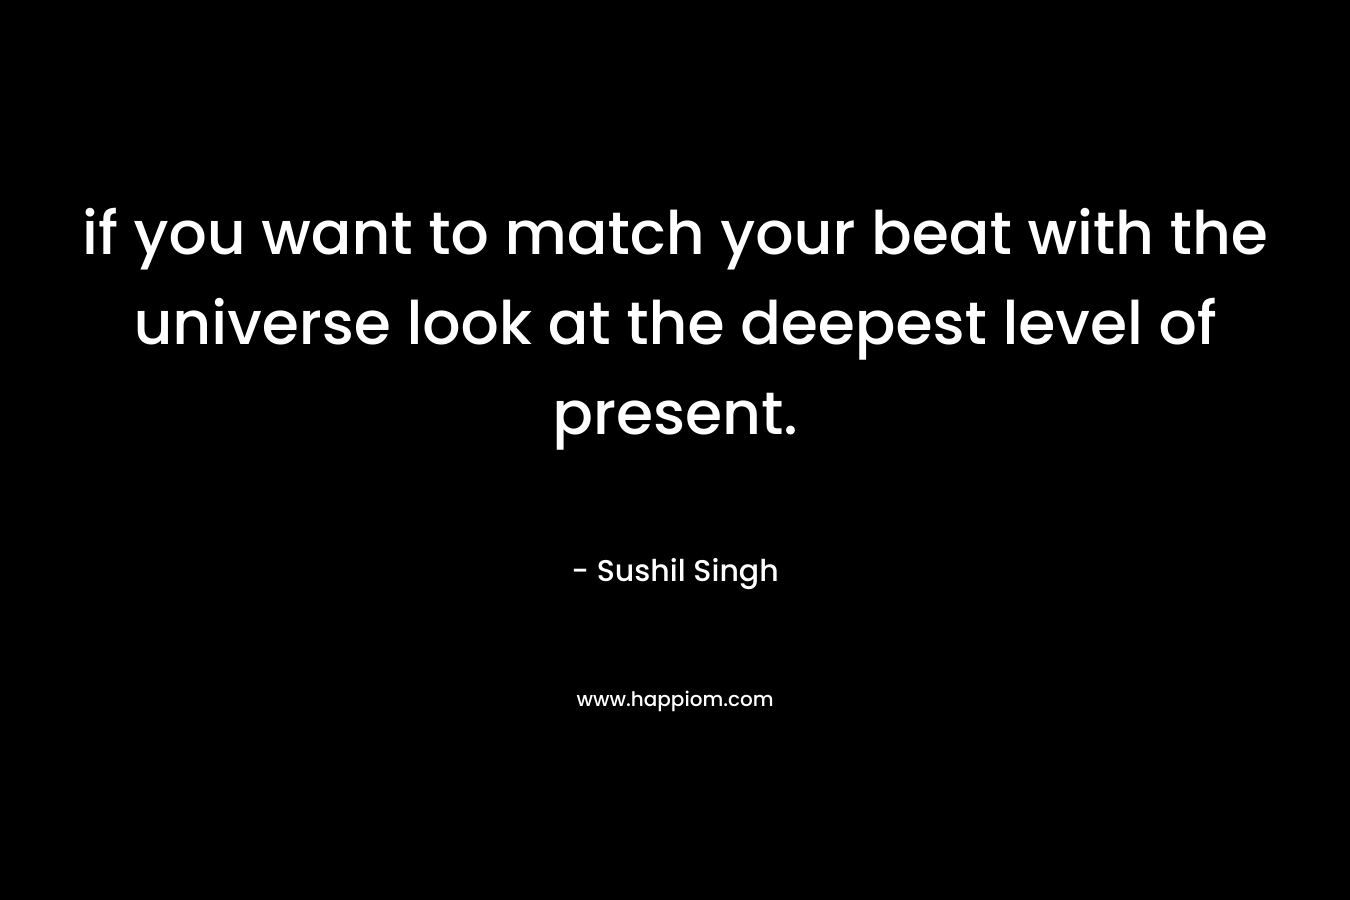 if you want to match your beat with the universe look at the deepest level of present. – Sushil Singh